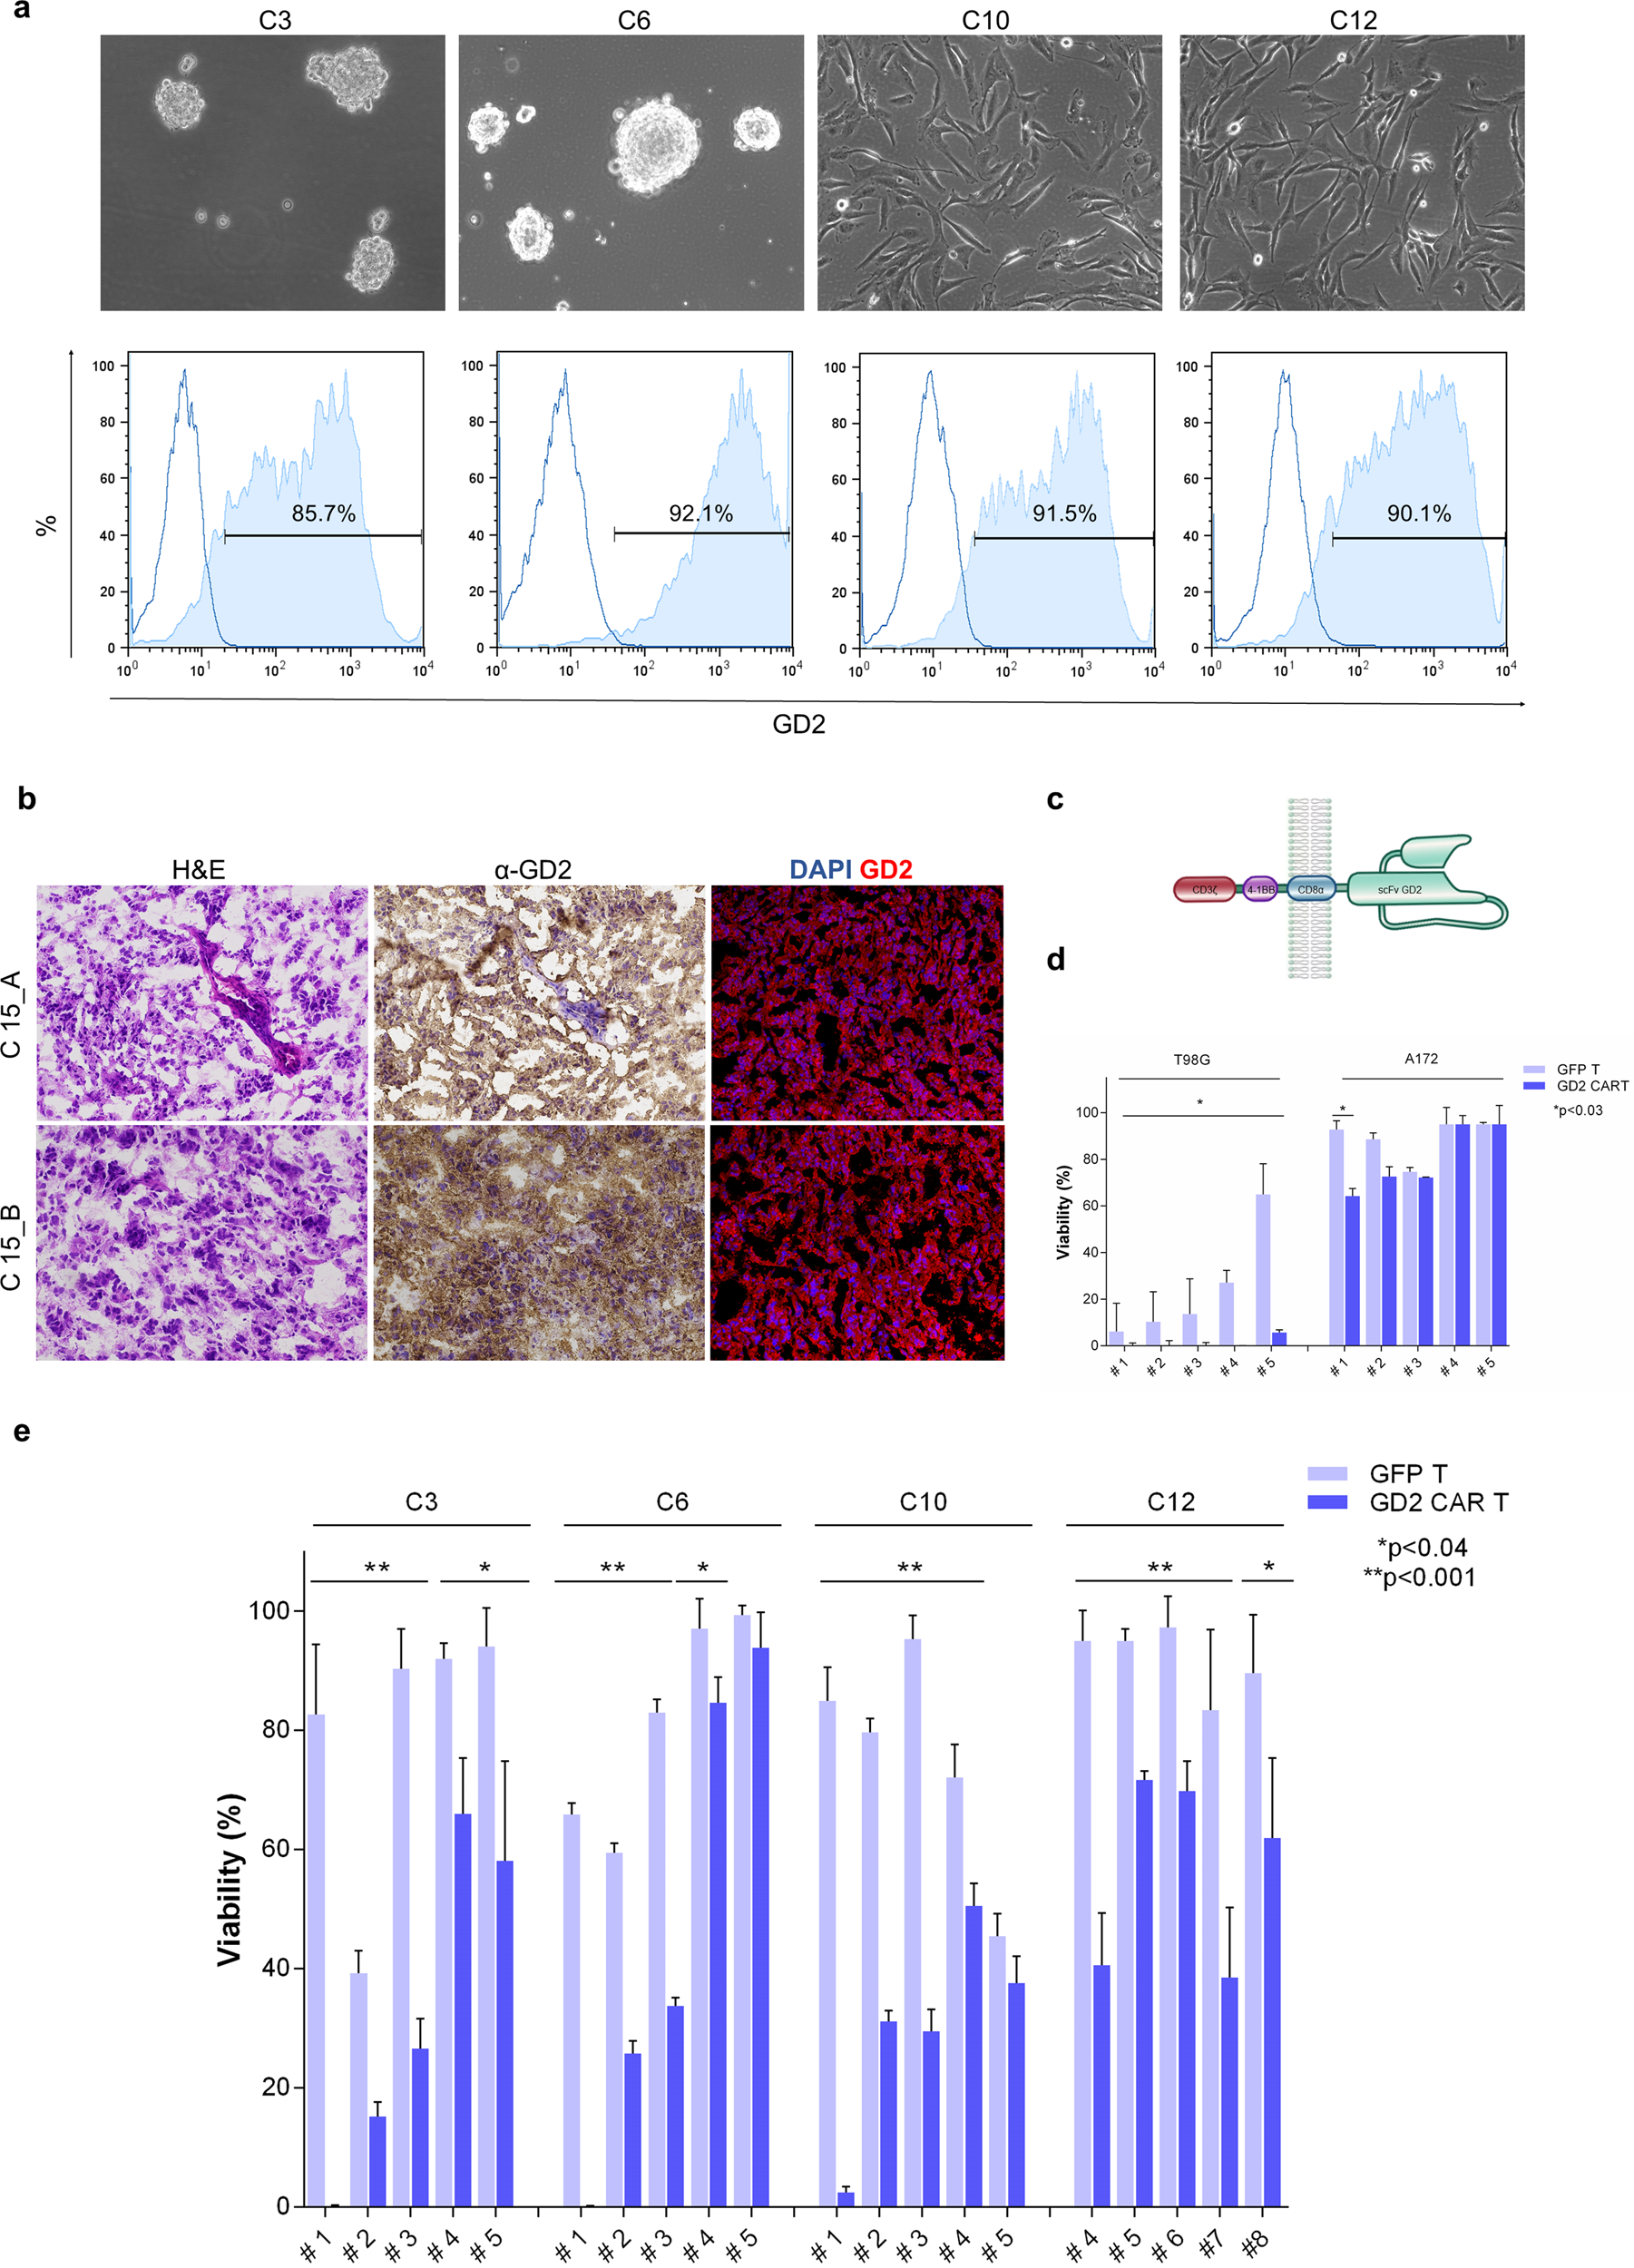 GD2 CAR T cells against human glioblastoma | npj Precision Oncology